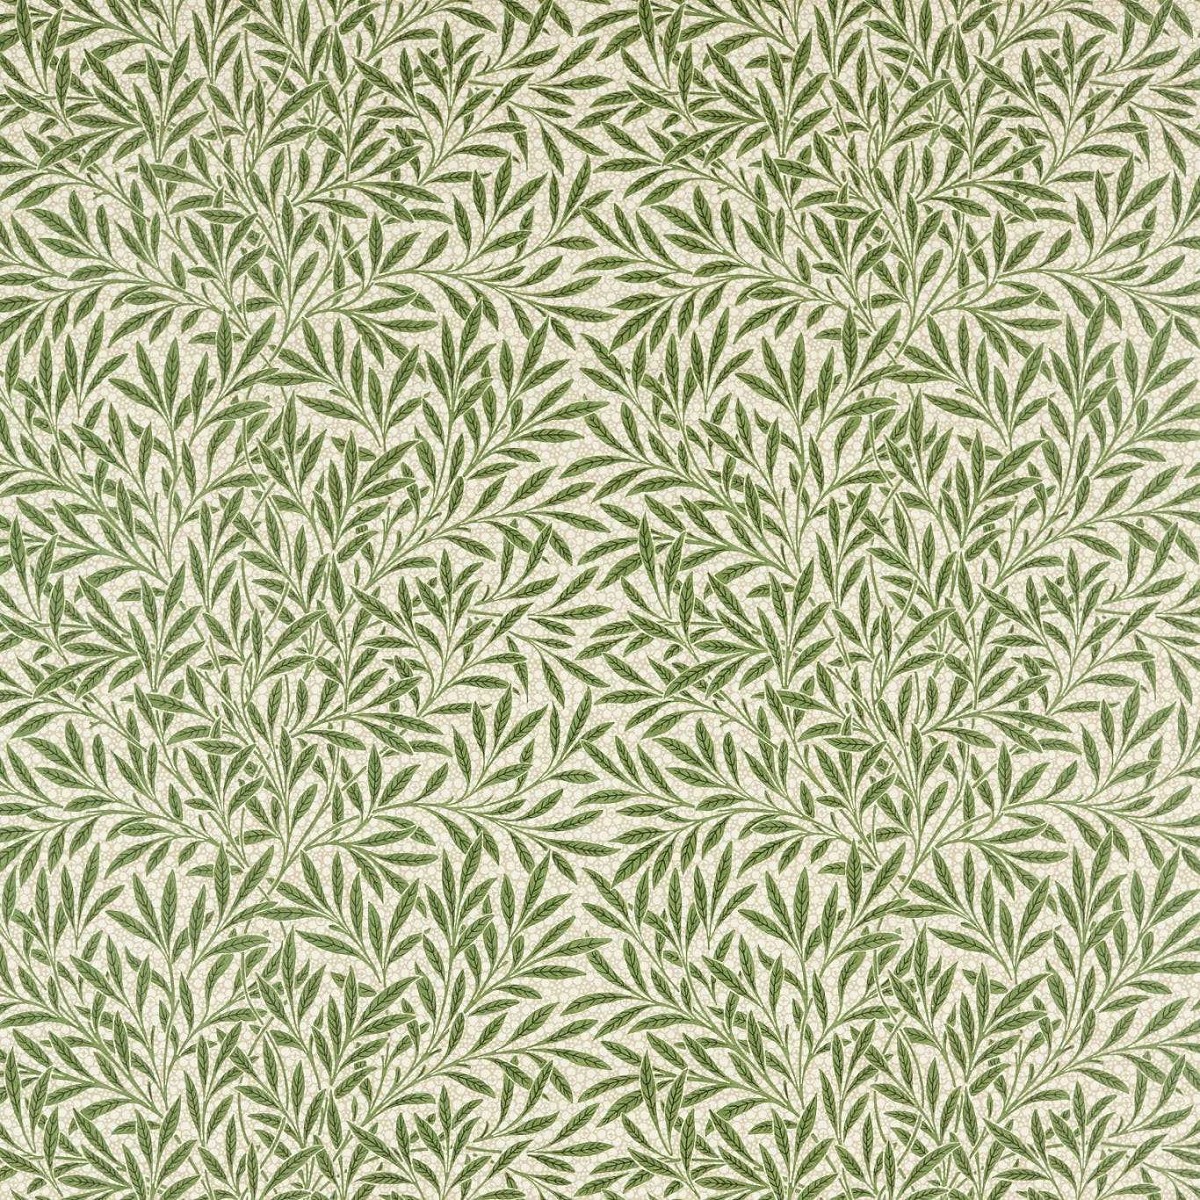 Emerys Willow Leaf Green Fabric by William Morris & Co.